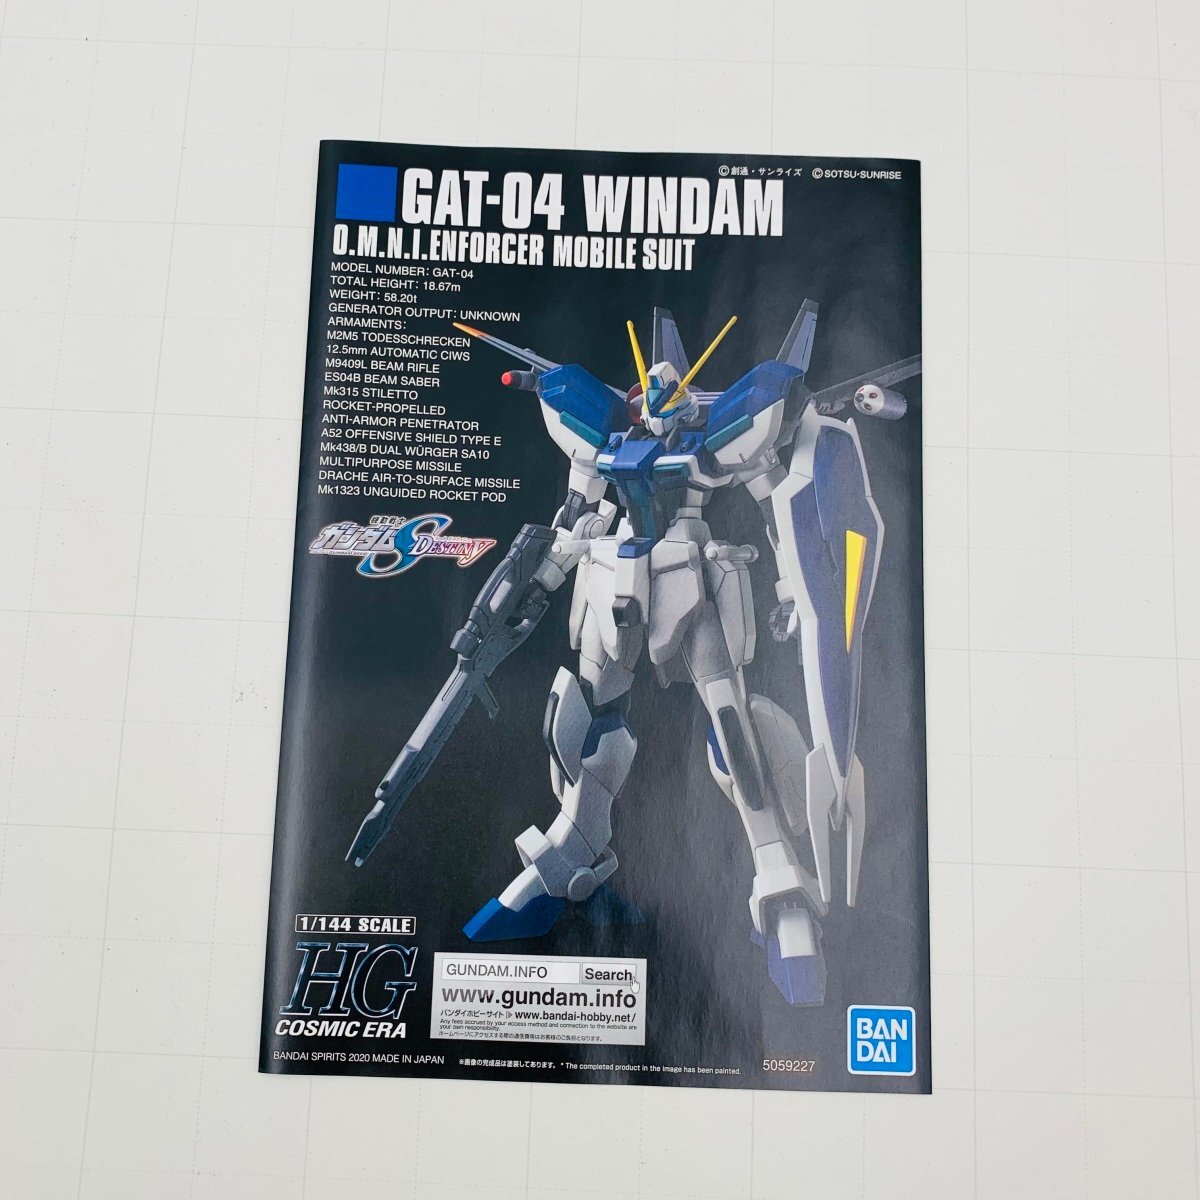  new goods not yet constructed HG Mobile Suit Gundam SEED DESTINY 1/144 Windom 